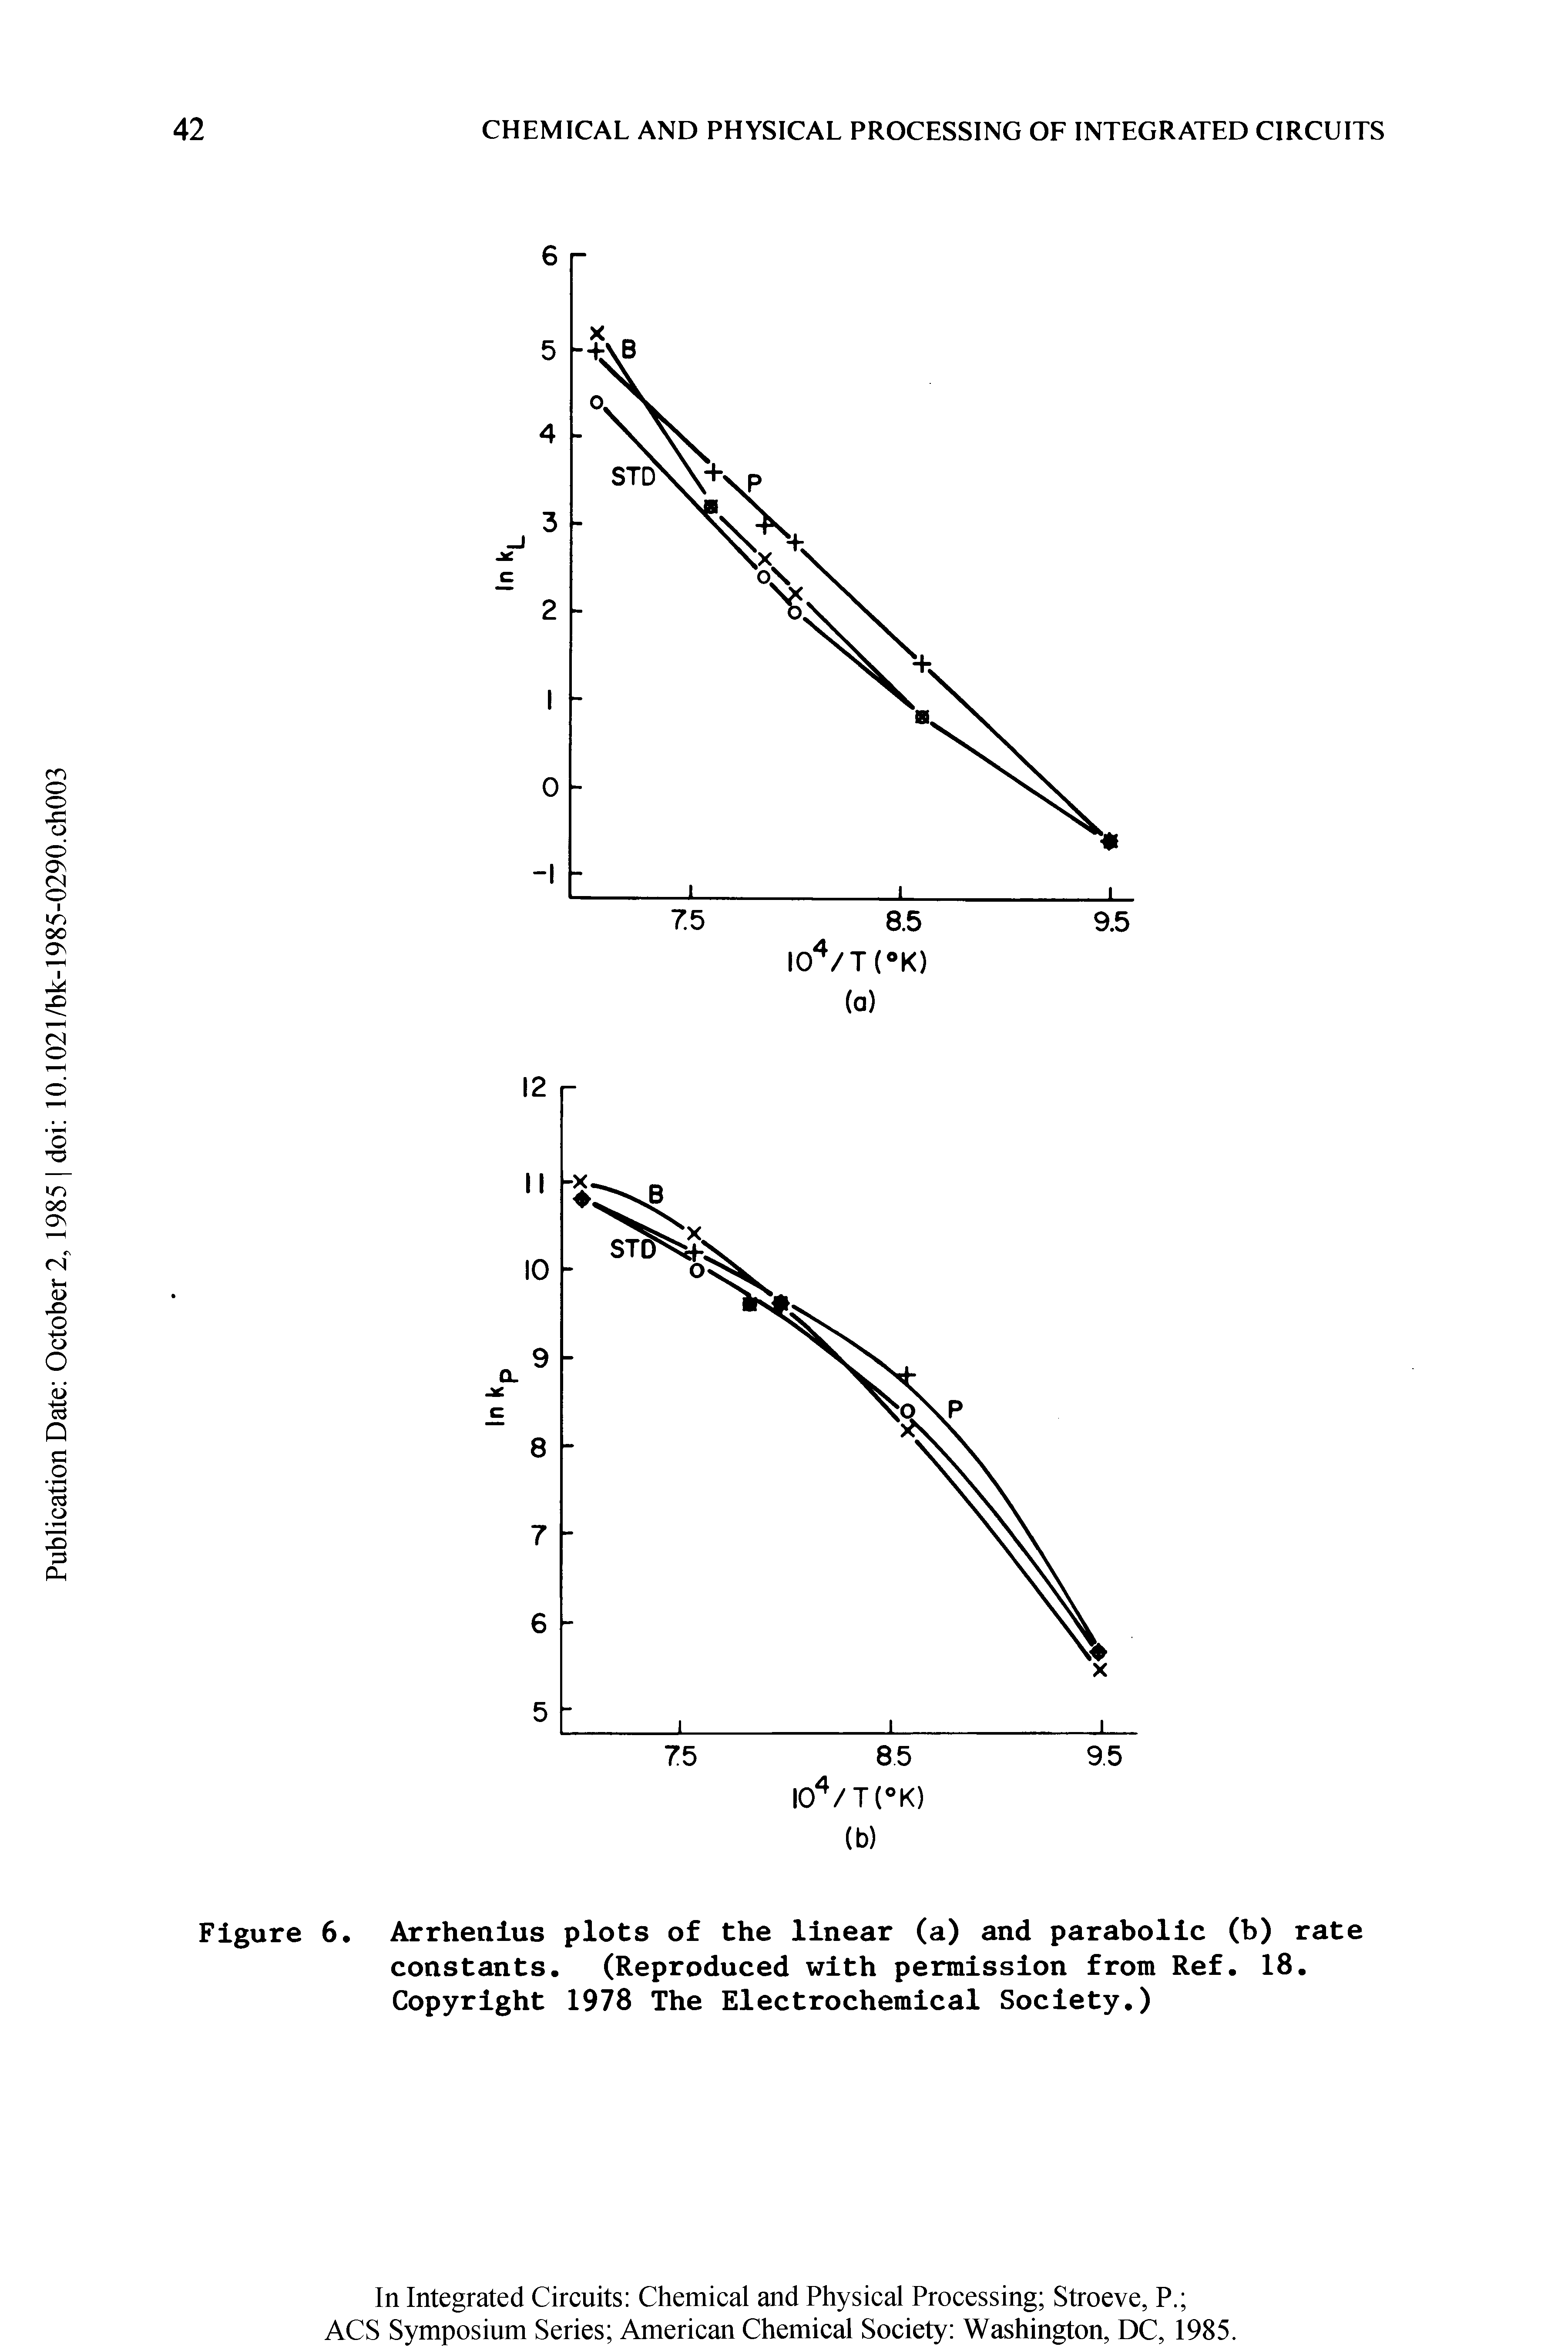 Figure 6. Arrhenius plots of the linear (a) and parabolic (b) rate constants. (Reproduced with permission from Ref. 18. Copyright 1978 The Electrochemical Society.)...